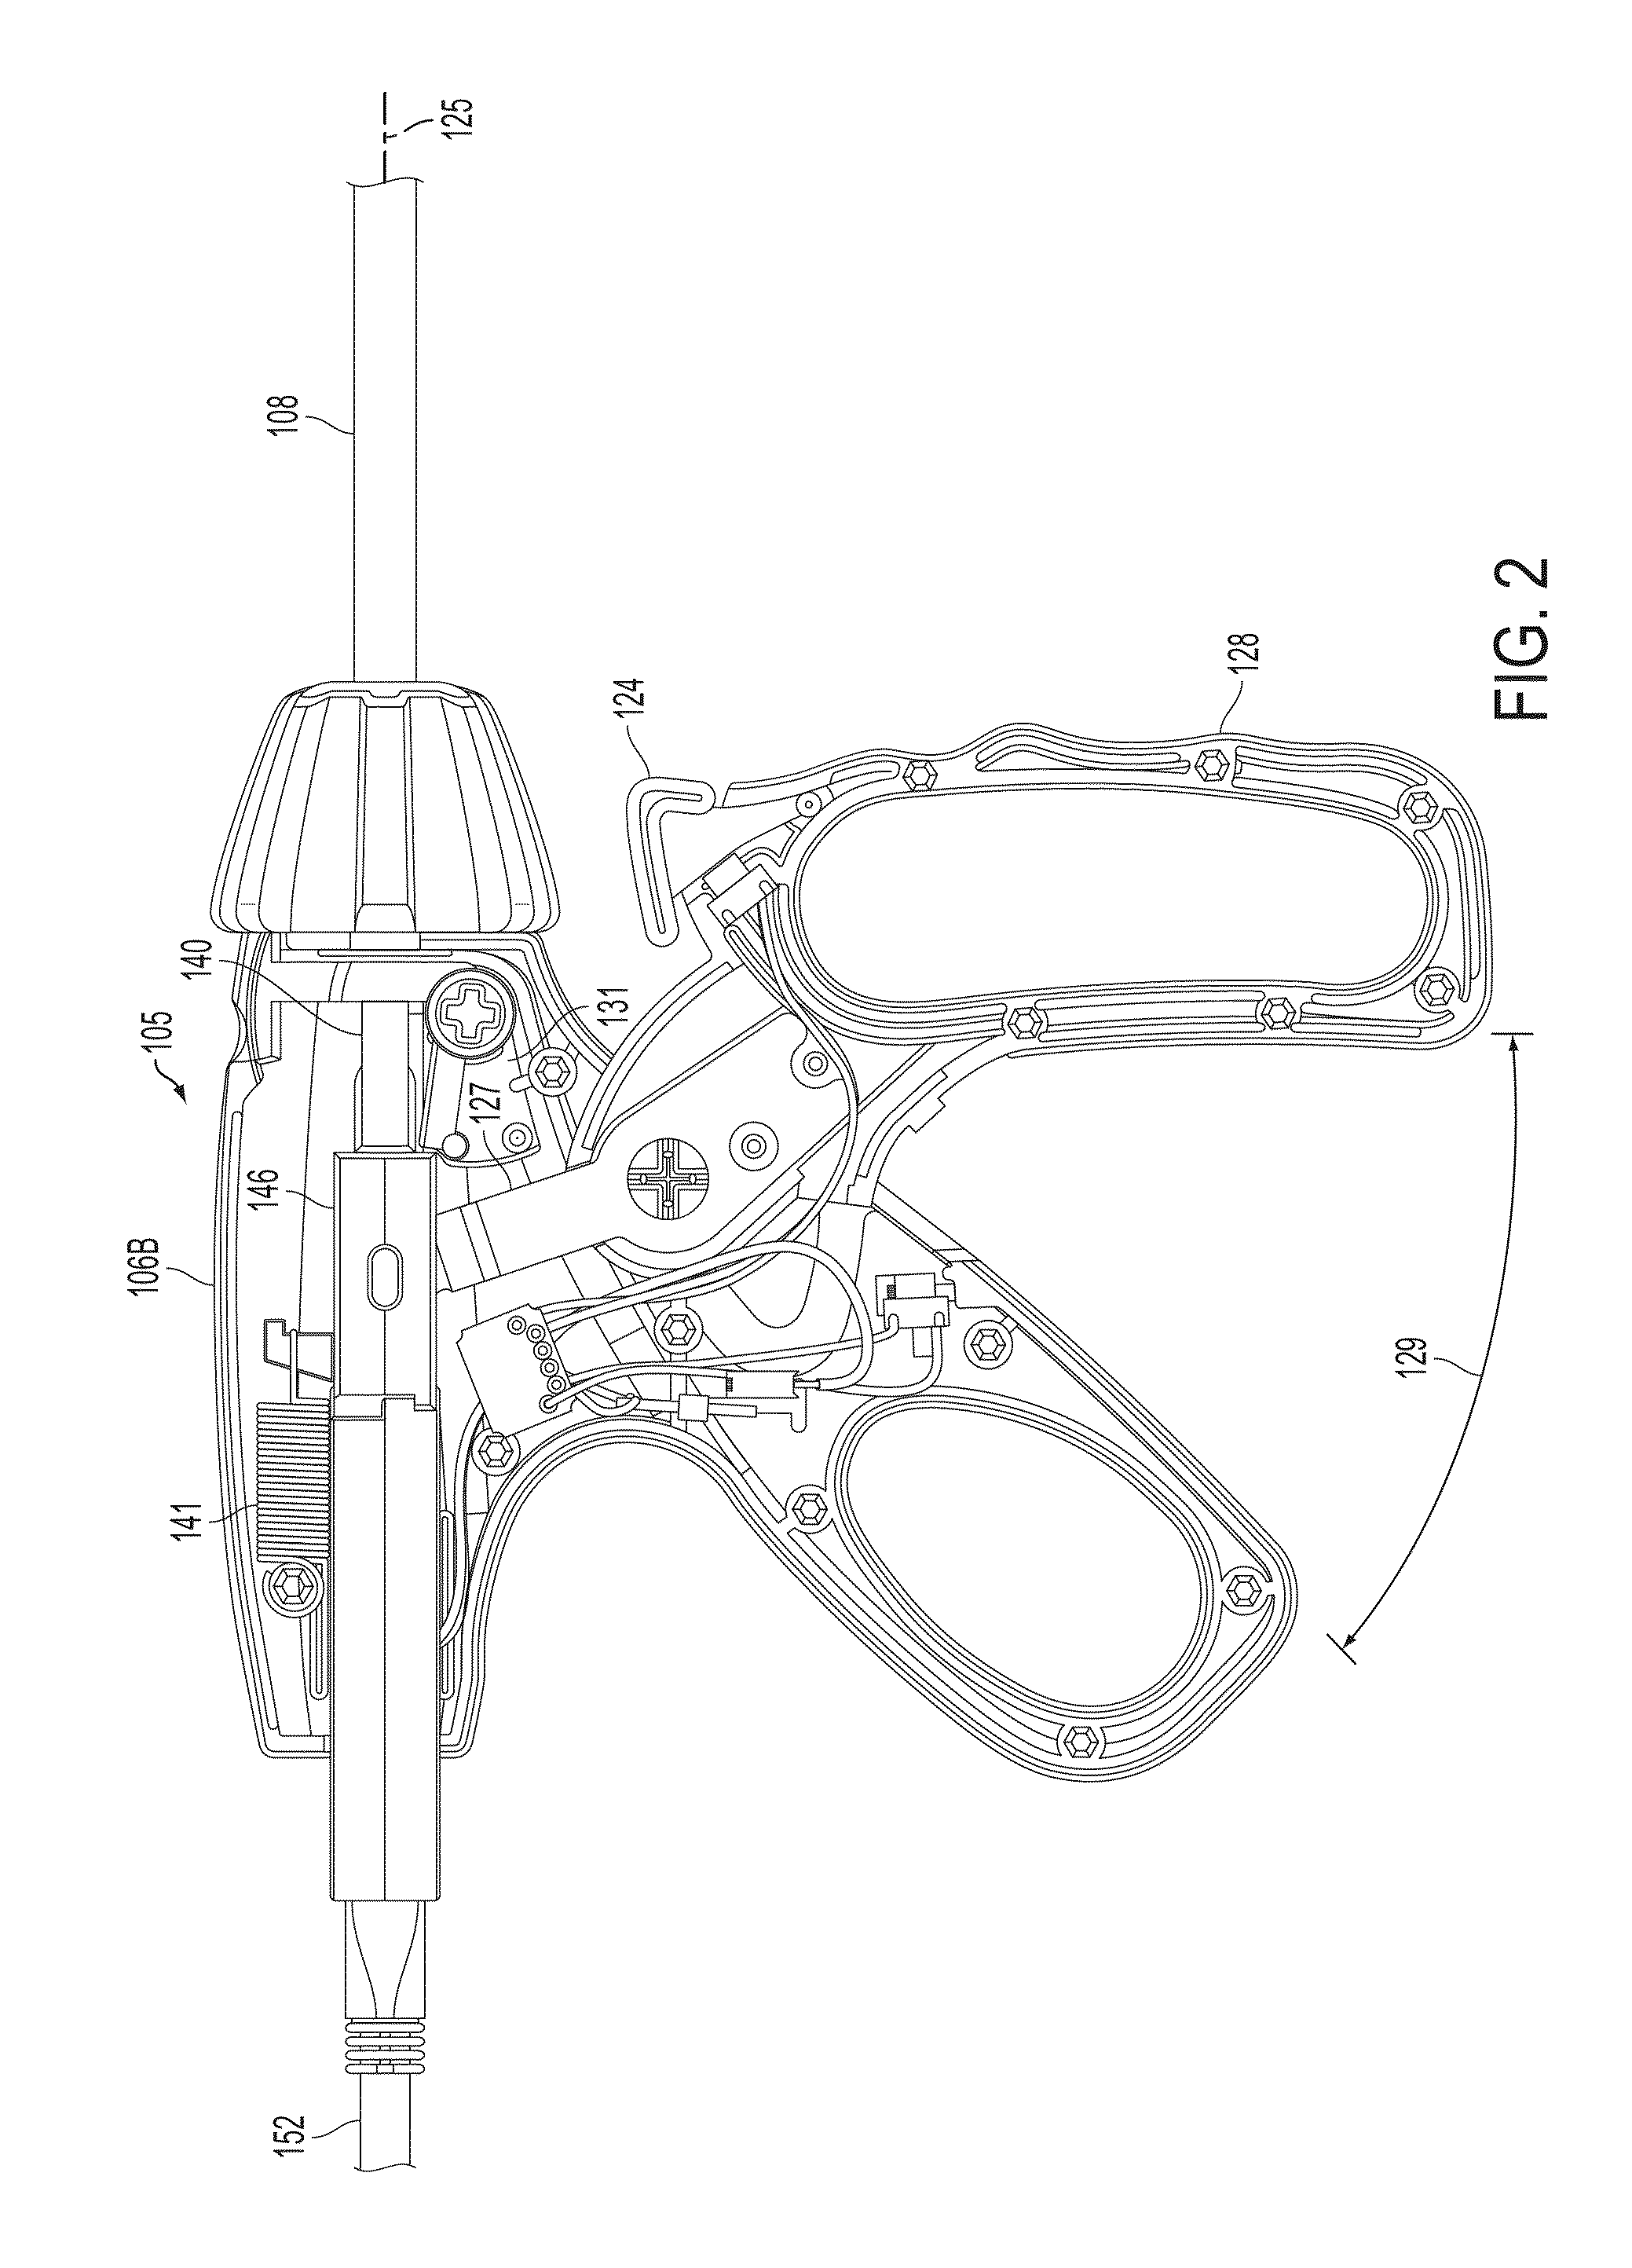 Electrosurgical cutting and sealing instrument